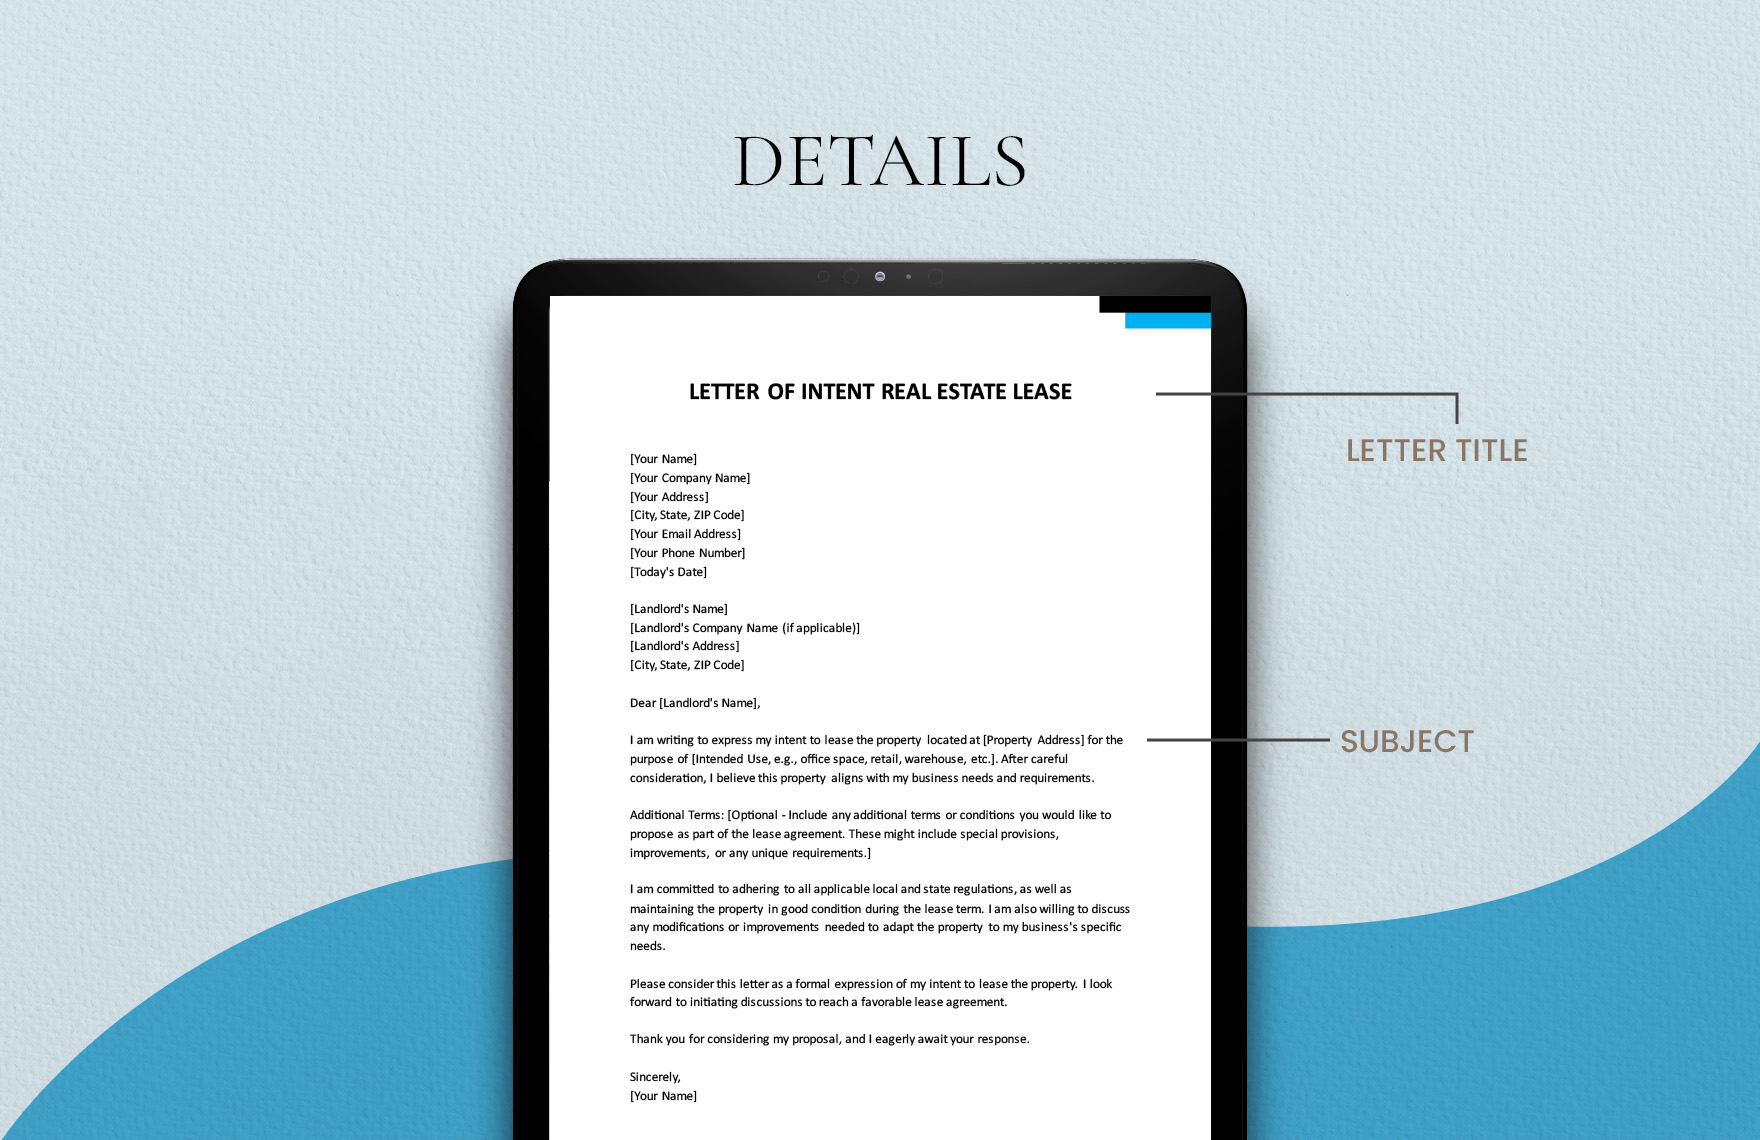 Letter Of Intent Real Estate Lease